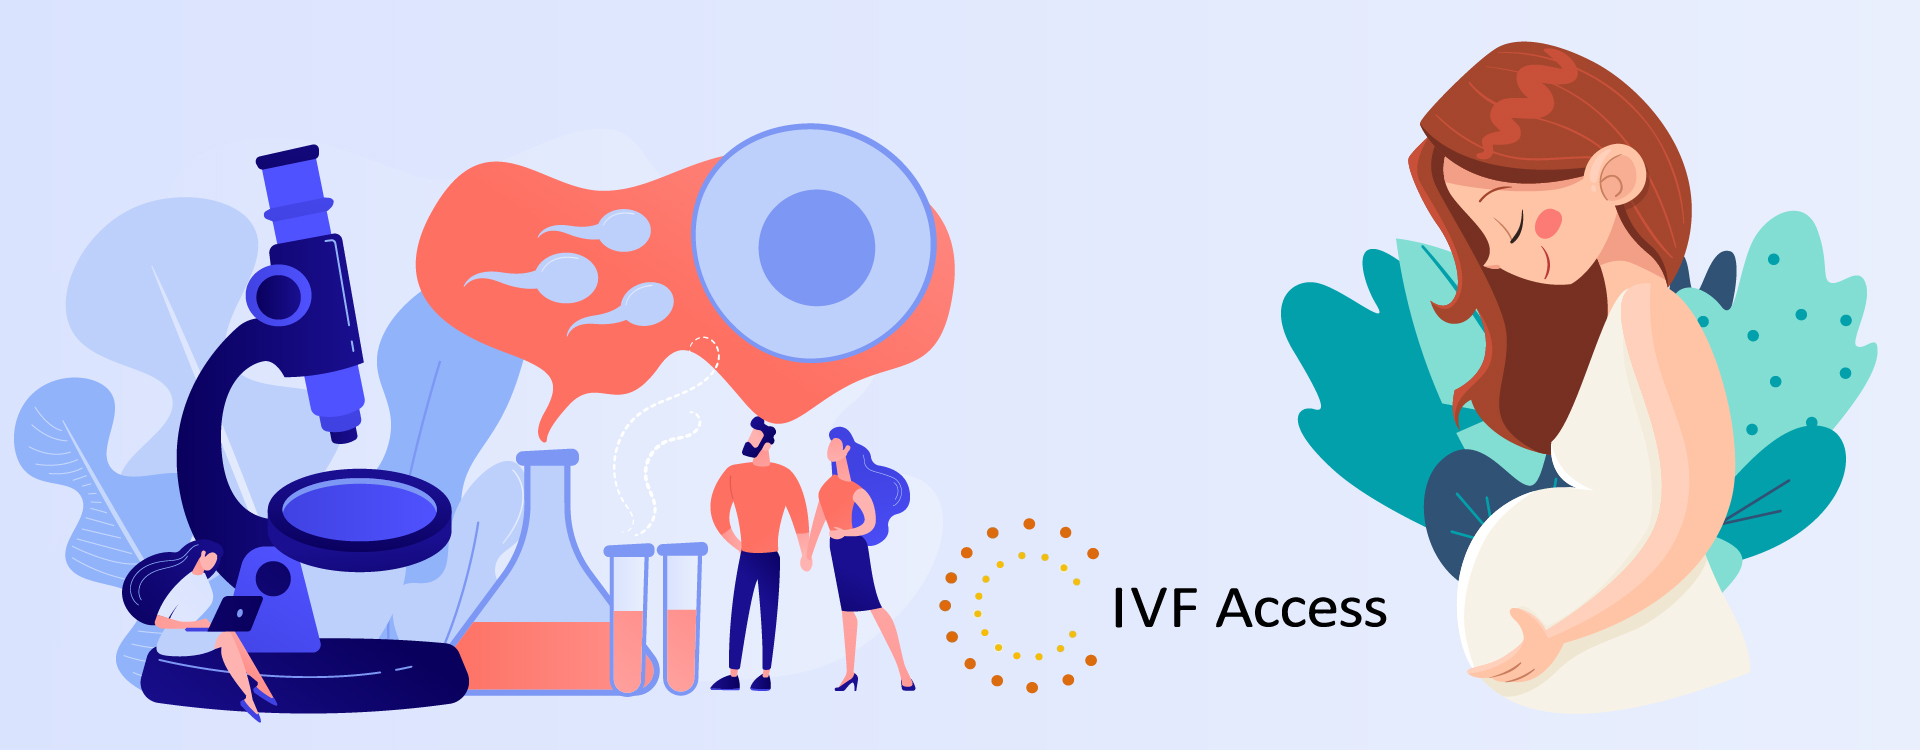 IVF Access through its innovation is revolutionizing the reproductive healthcare sector in India.